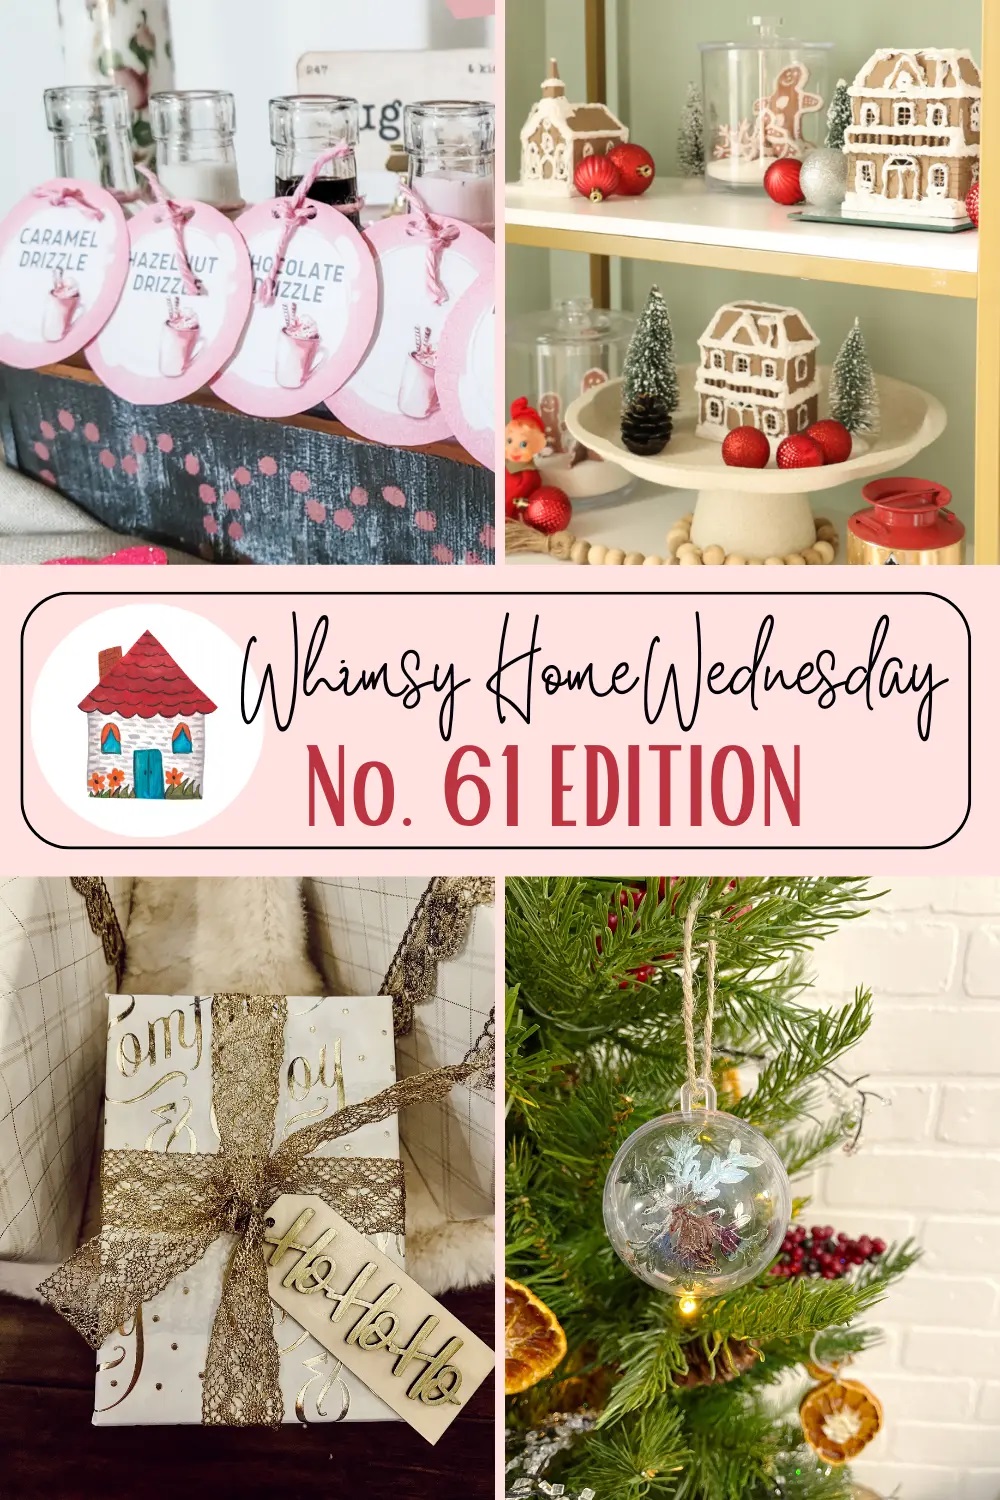 Whimsy Home Wednesday Blog Link Party No. 61